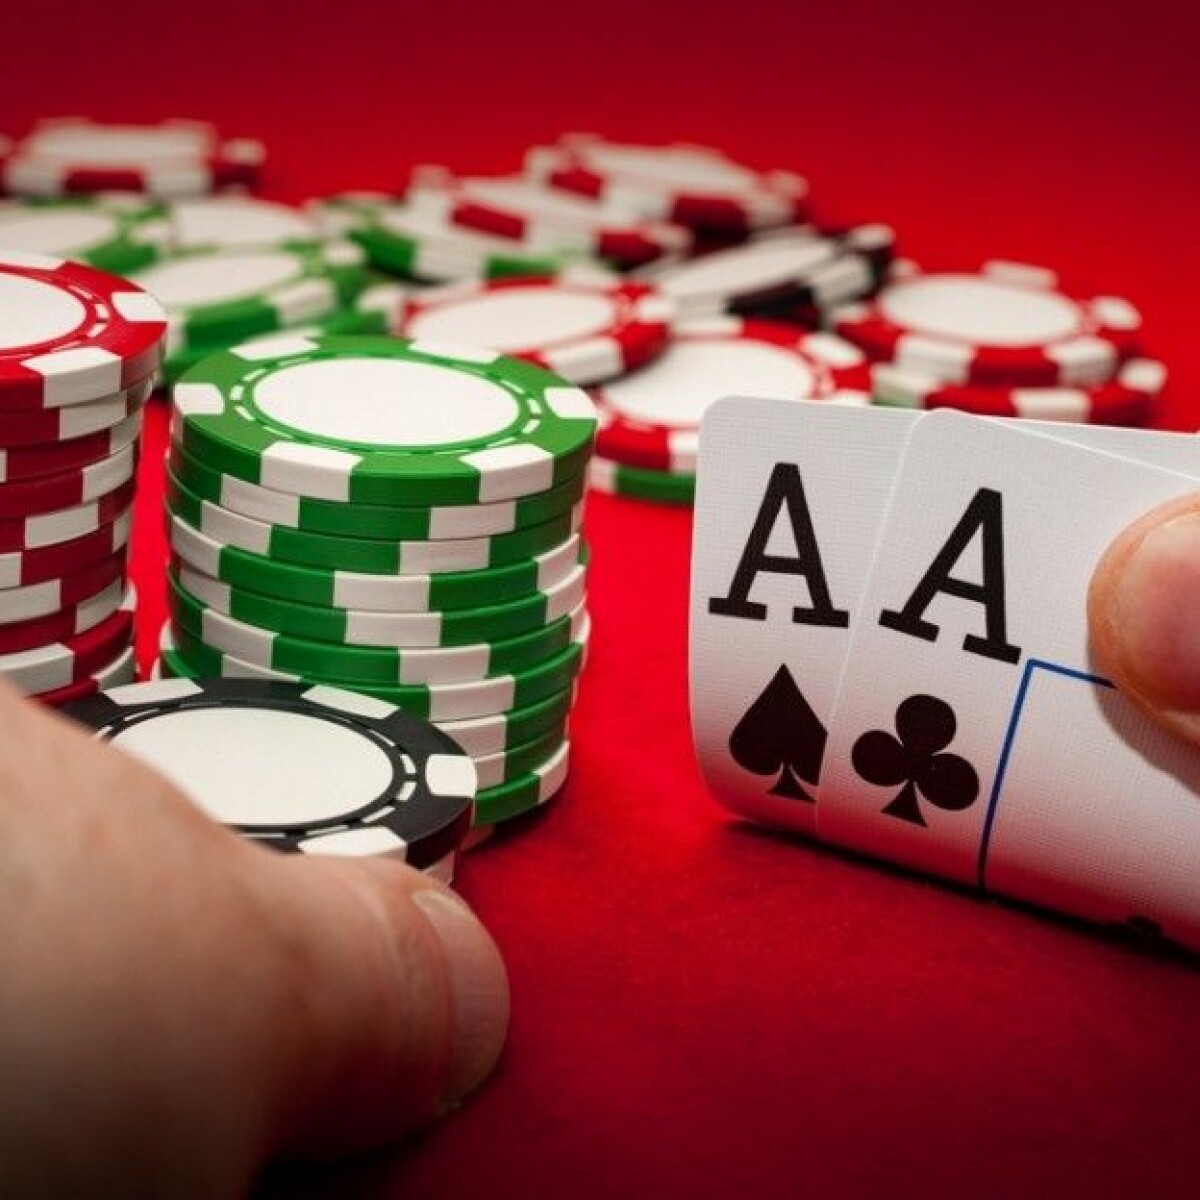 Poker players aren't like other gamers